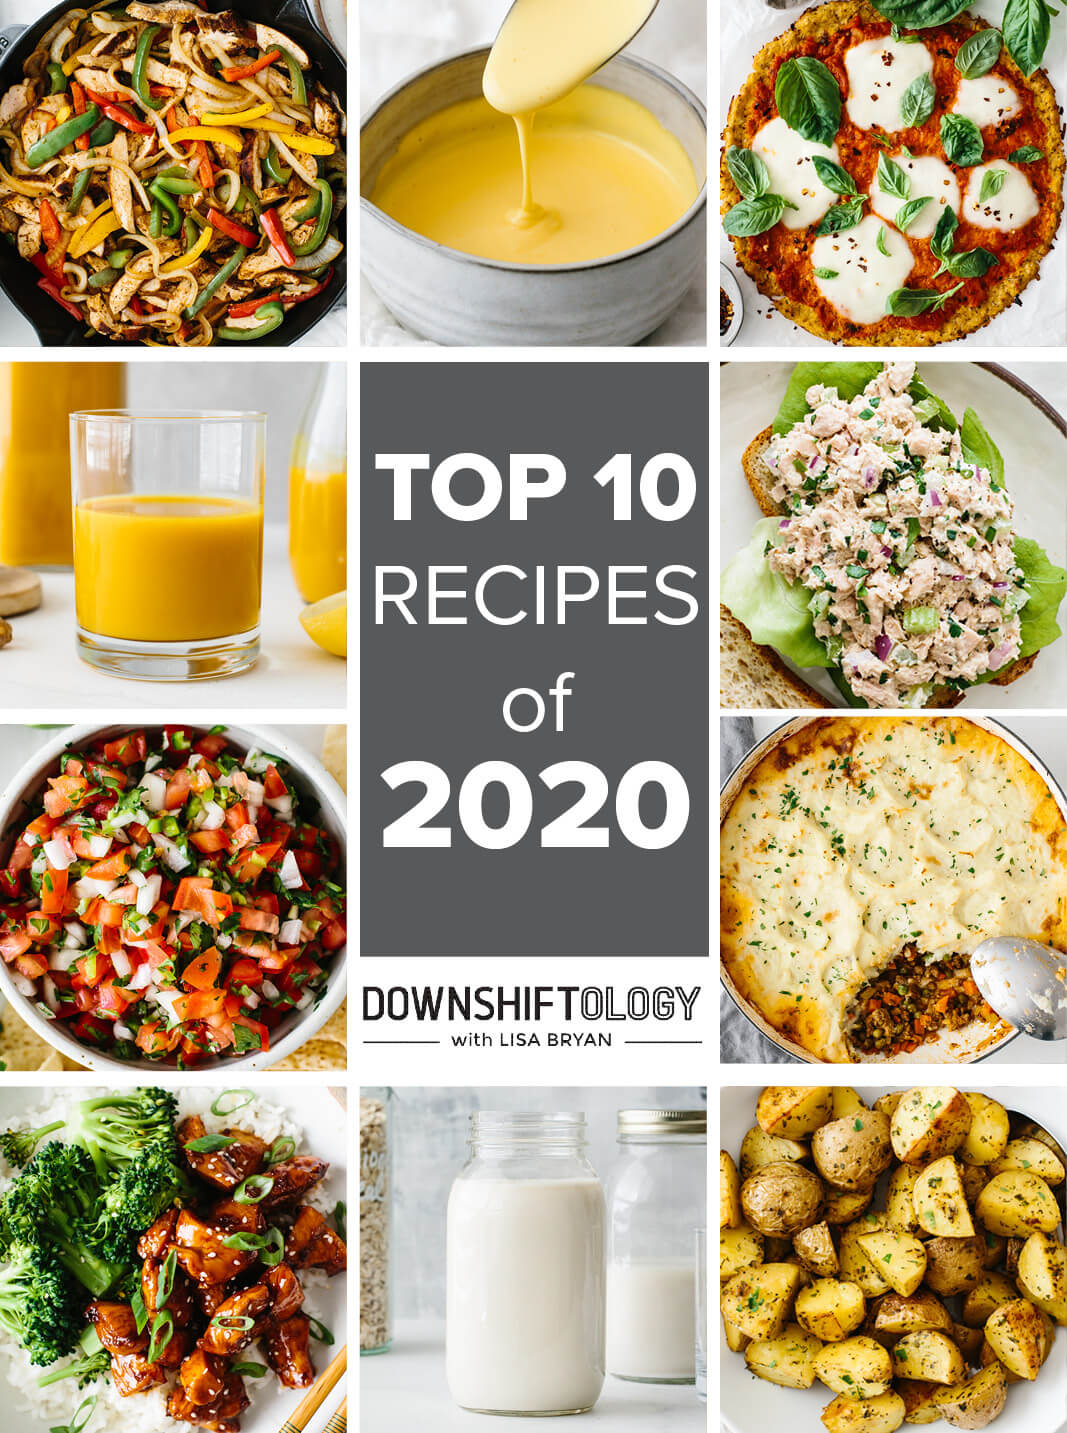 Top 10 recipes on Downshiftology